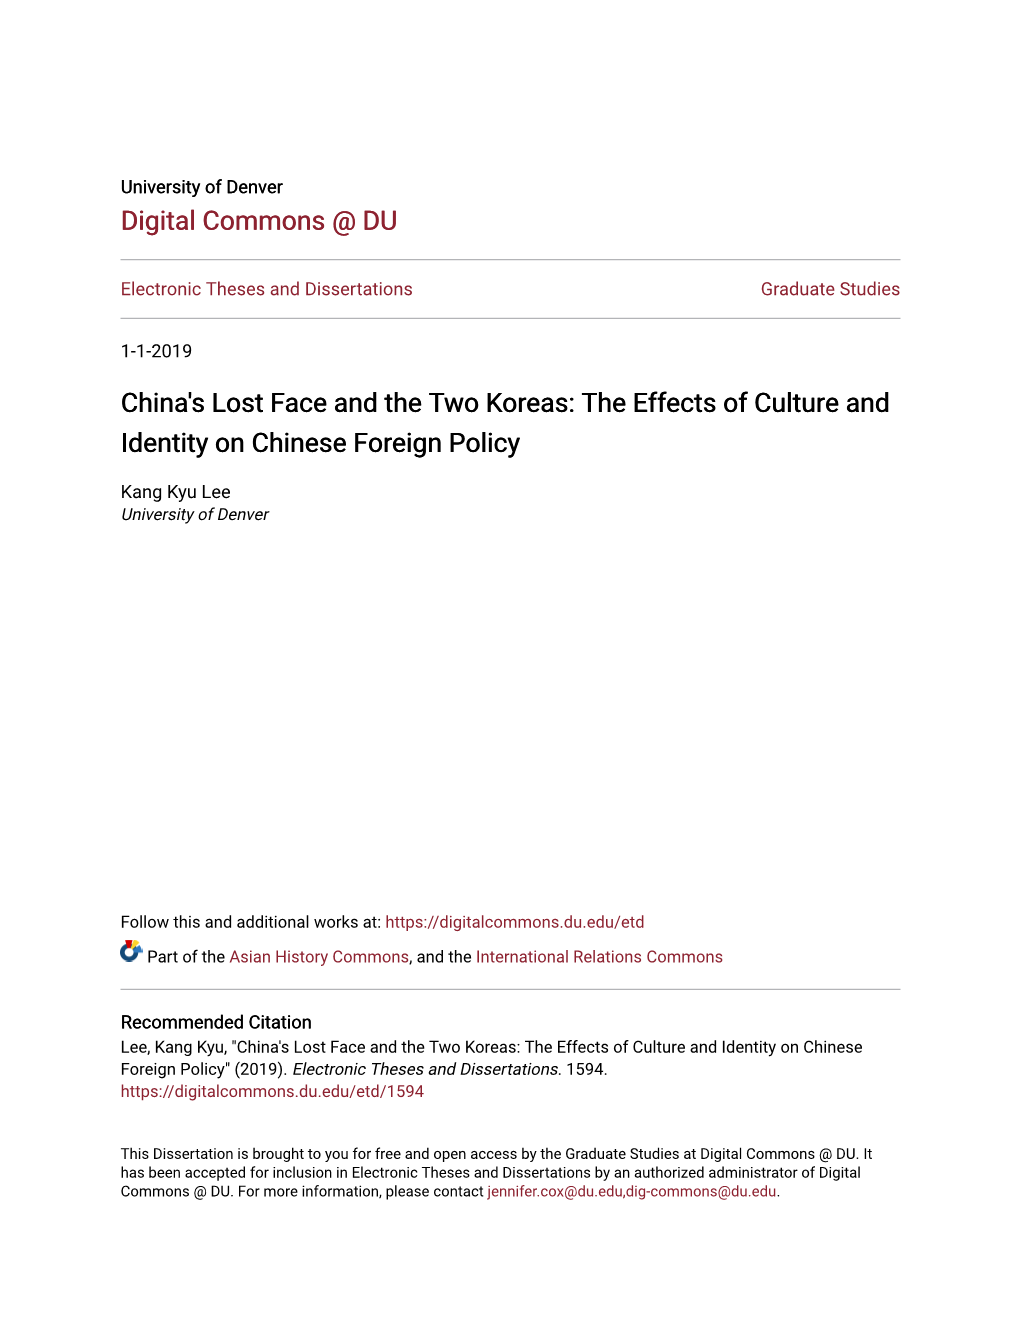 China's Lost Face and the Two Koreas: the Effects of Culture and Identity on Chinese Foreign Policy